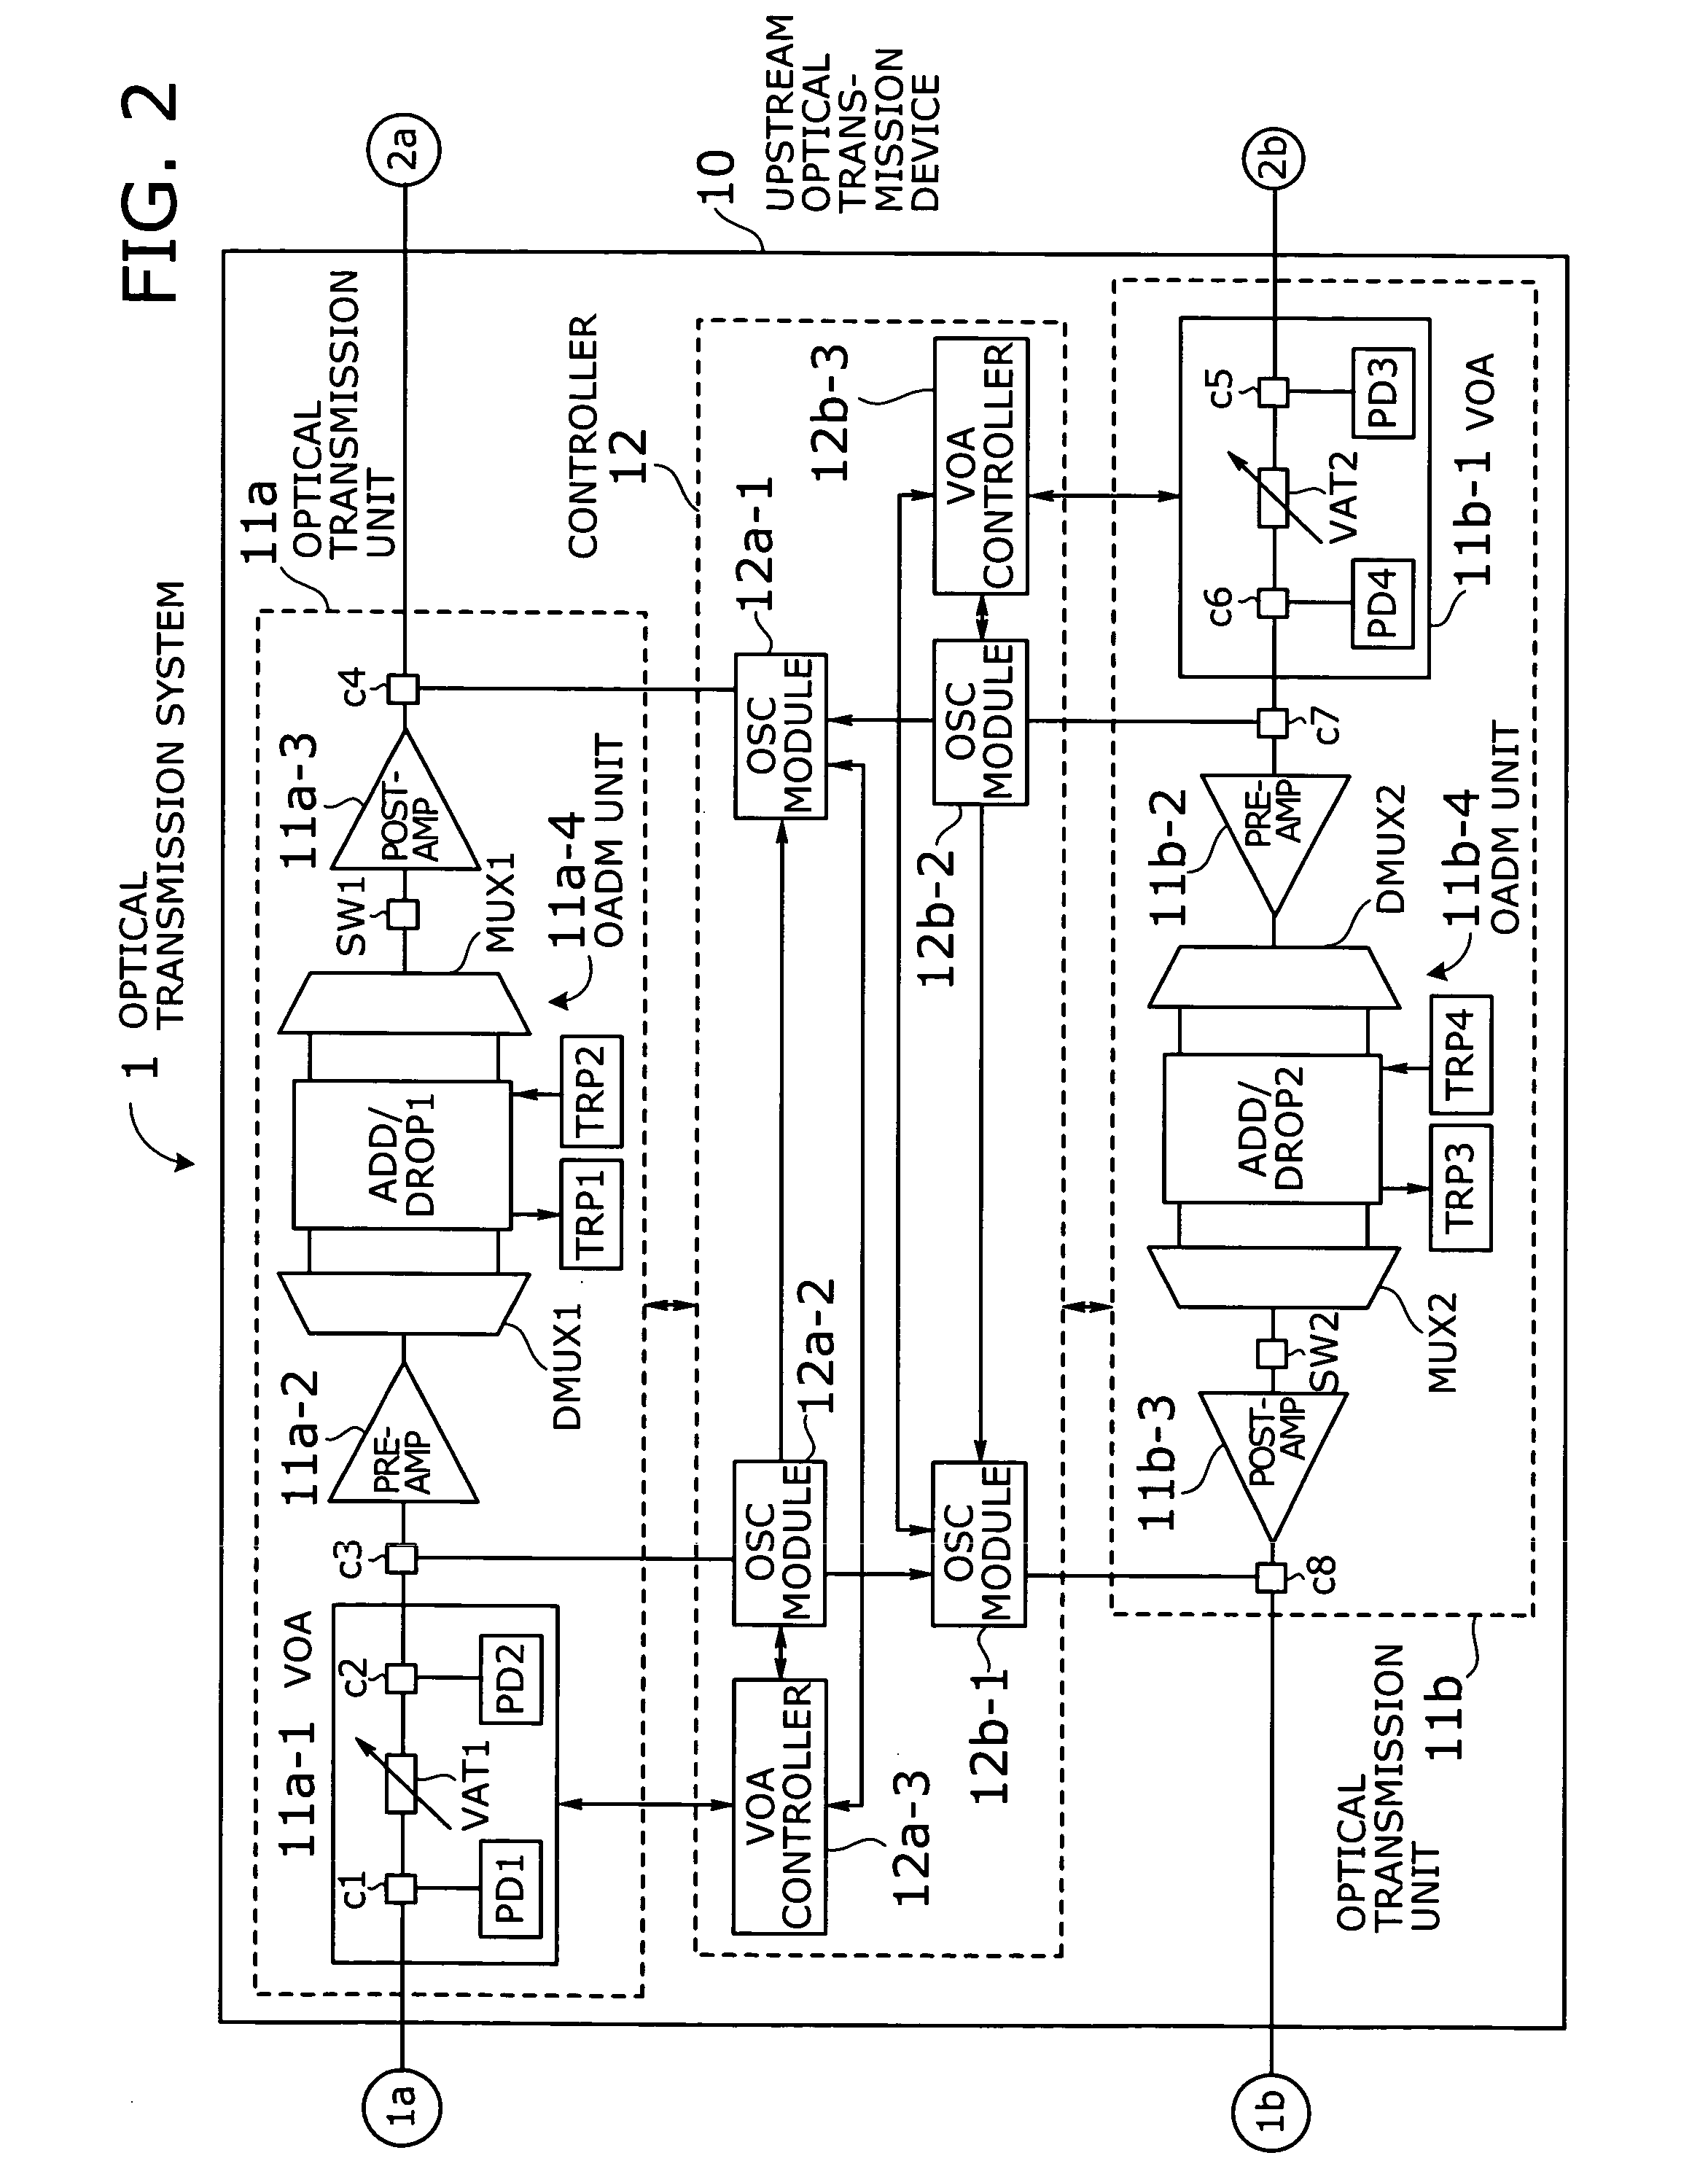 Optical transmission system with automatic signal level adjustment and startup functions